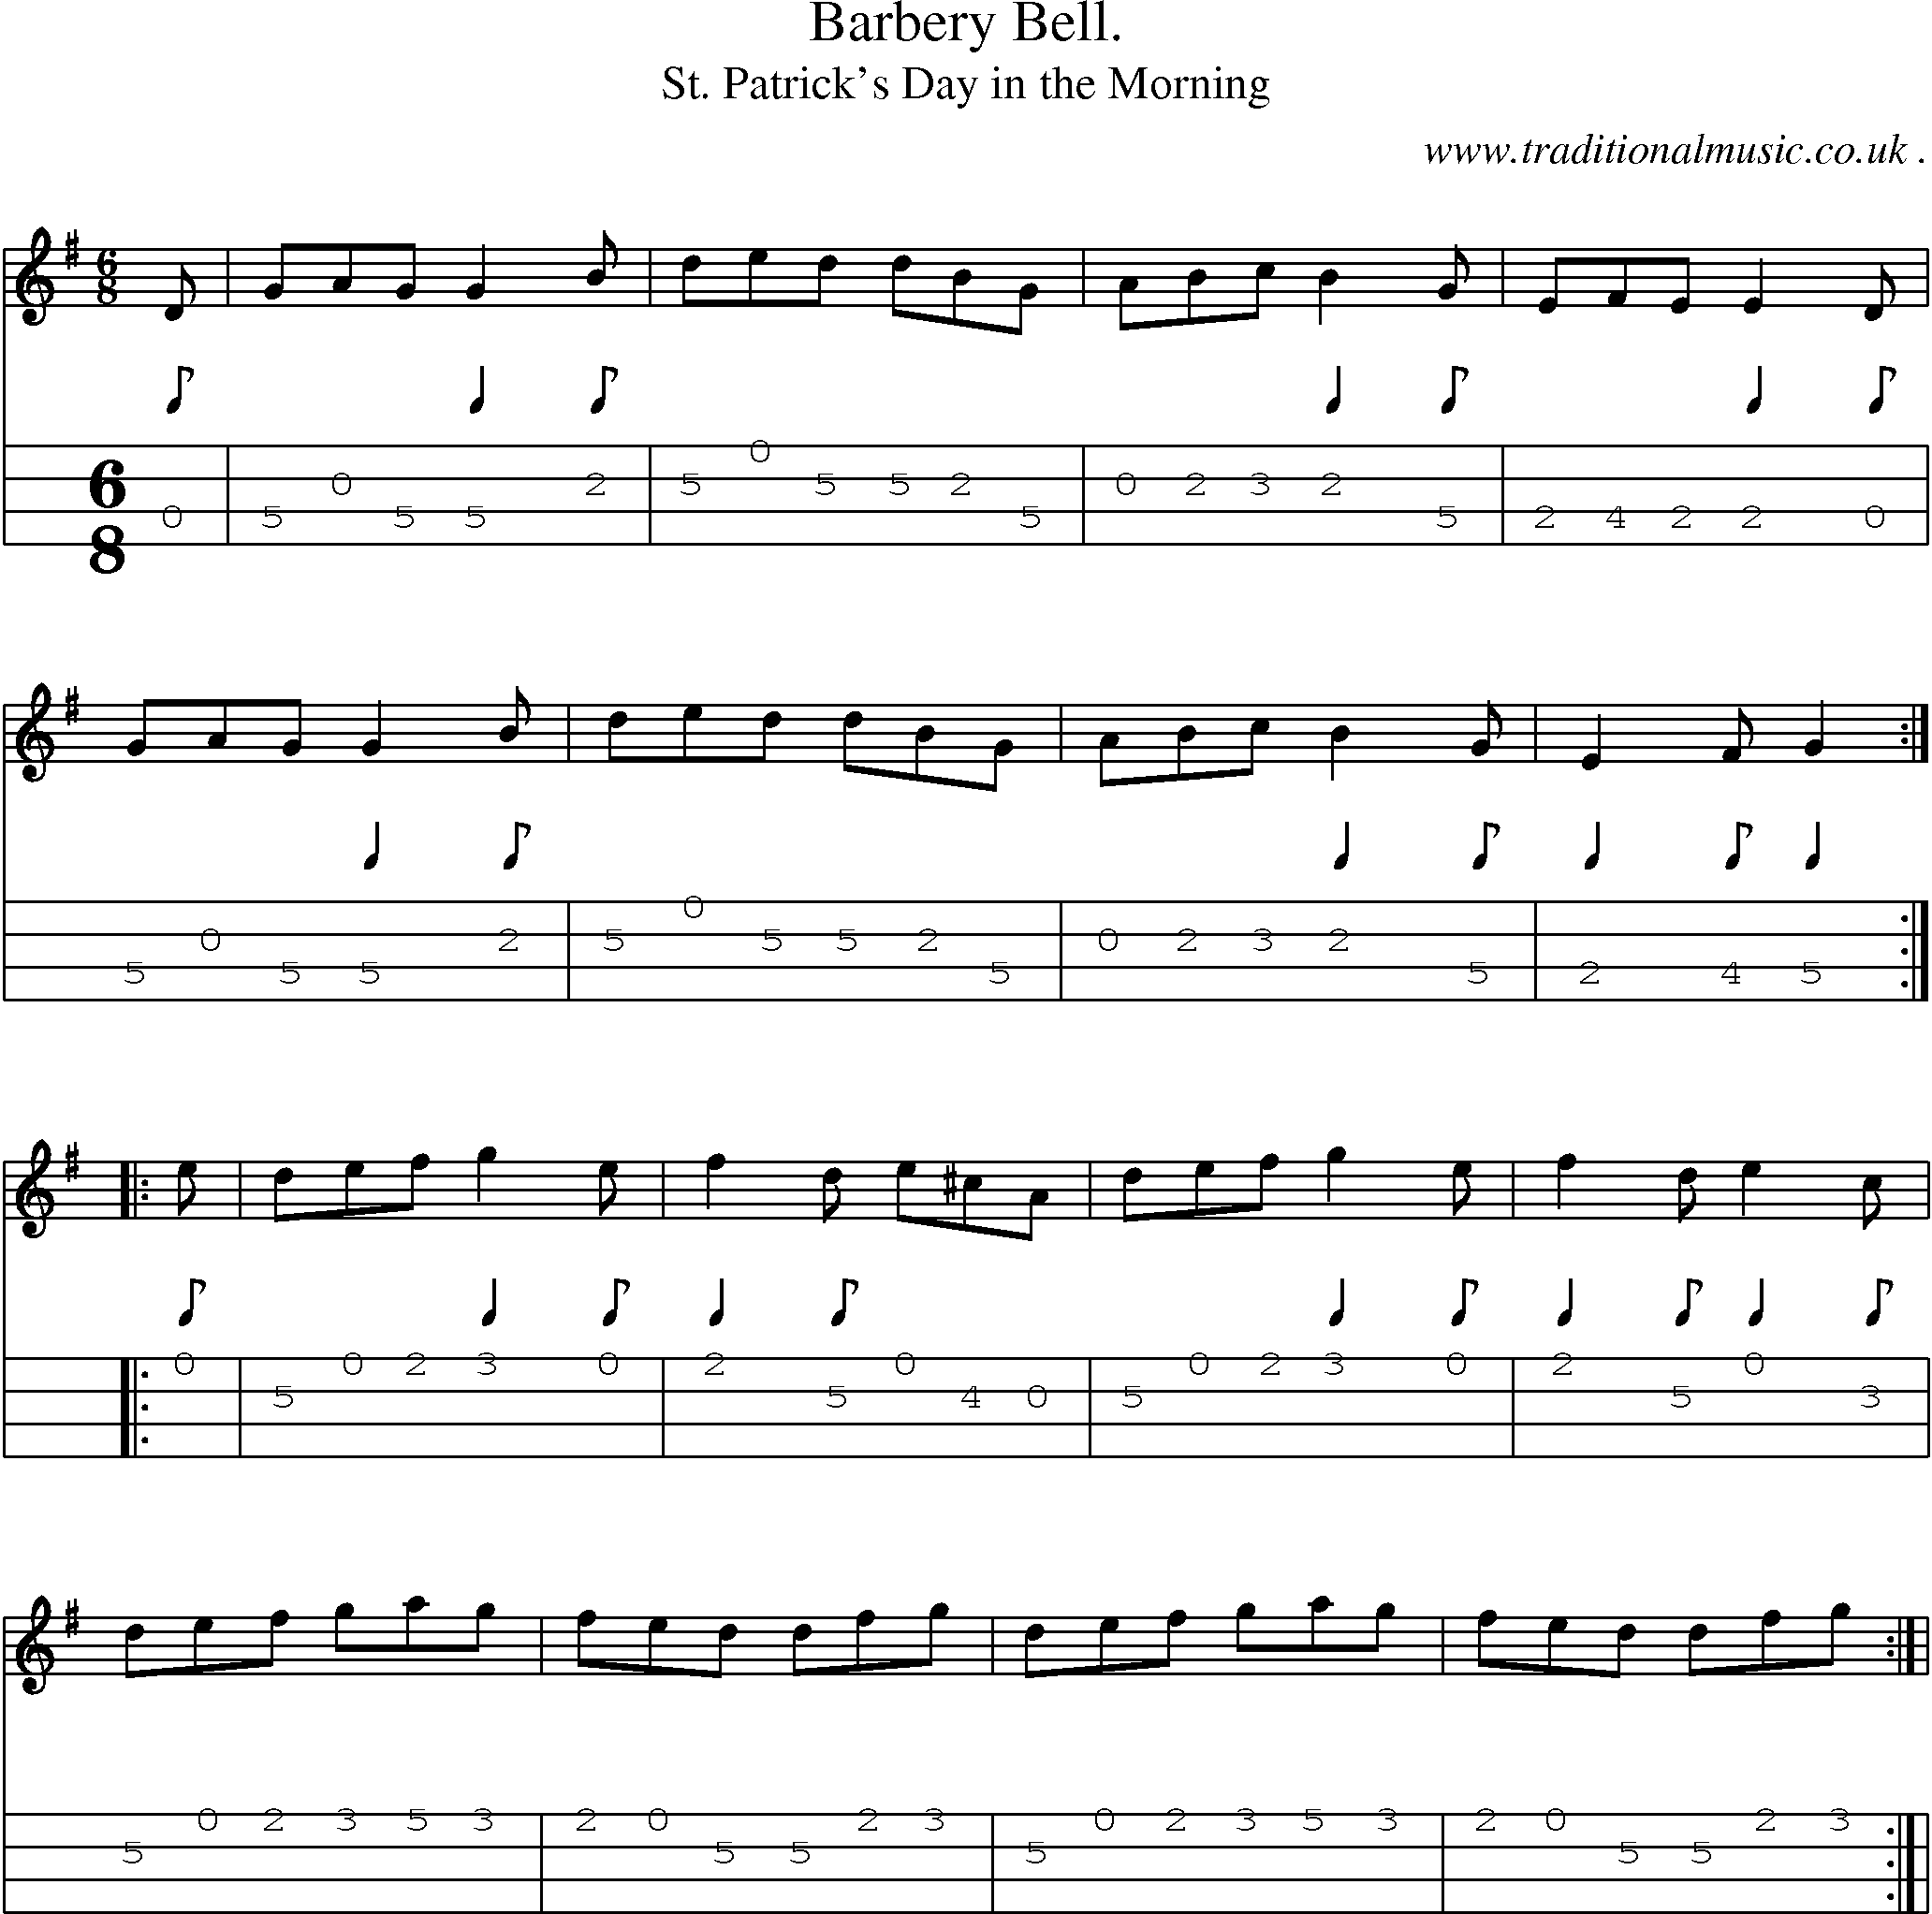 Sheet-Music and Mandolin Tabs for Barbery Bell